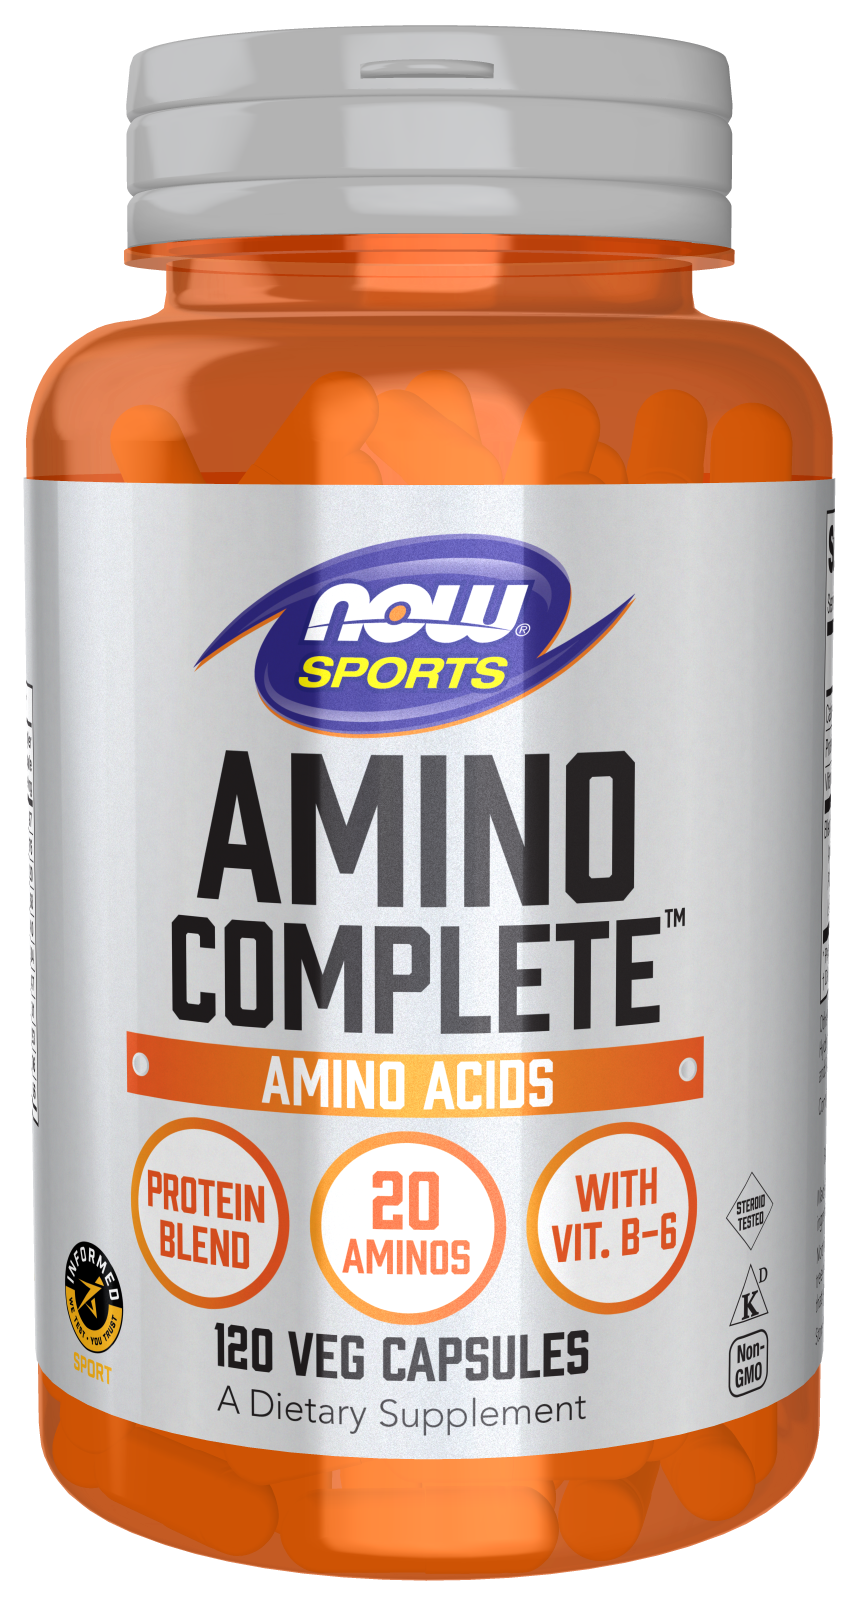 Amino Complete, Shop for NOW Amino Complete